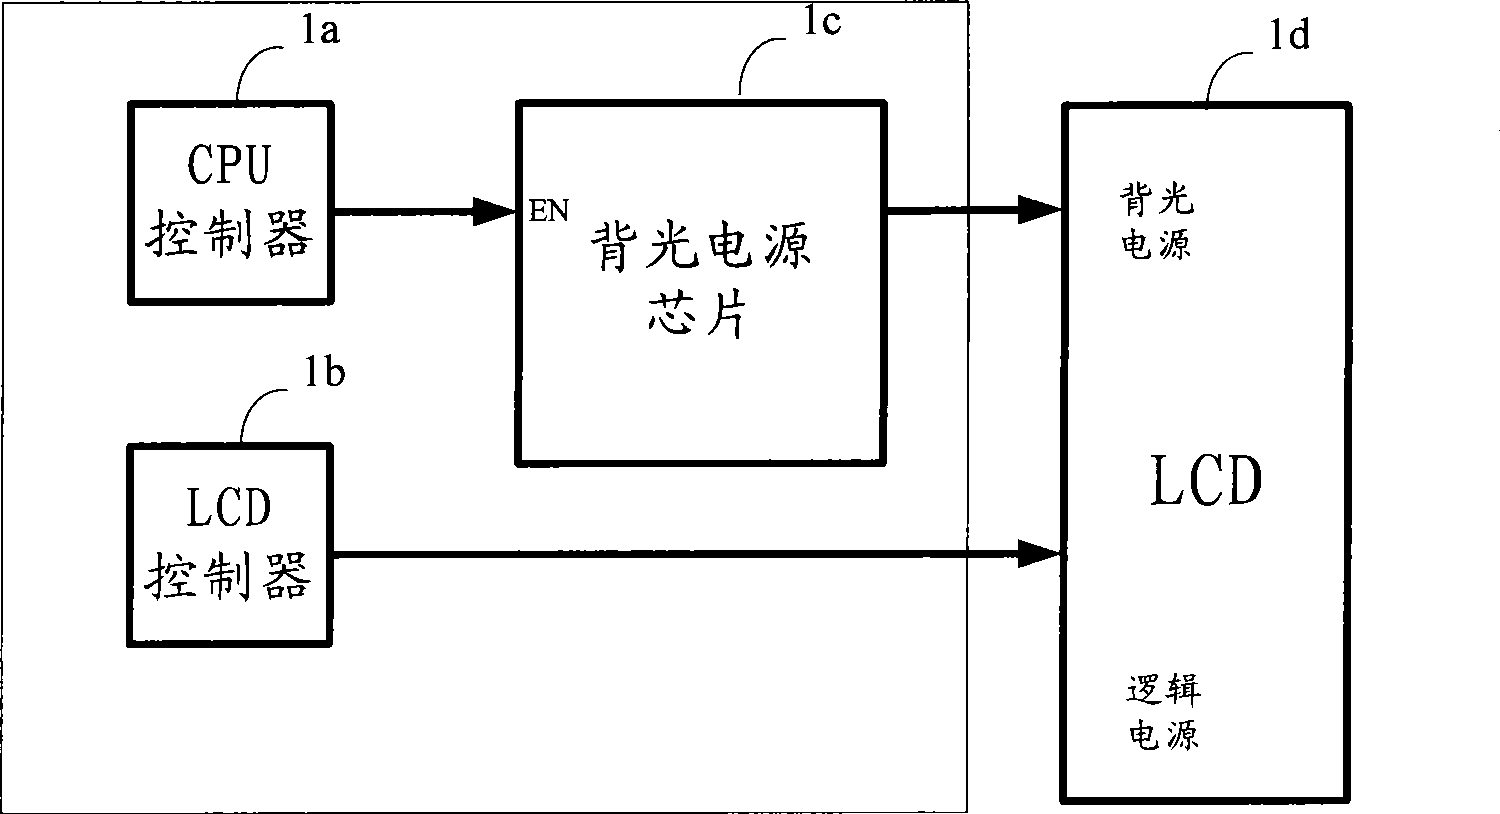 Control device for starting LCD power supply